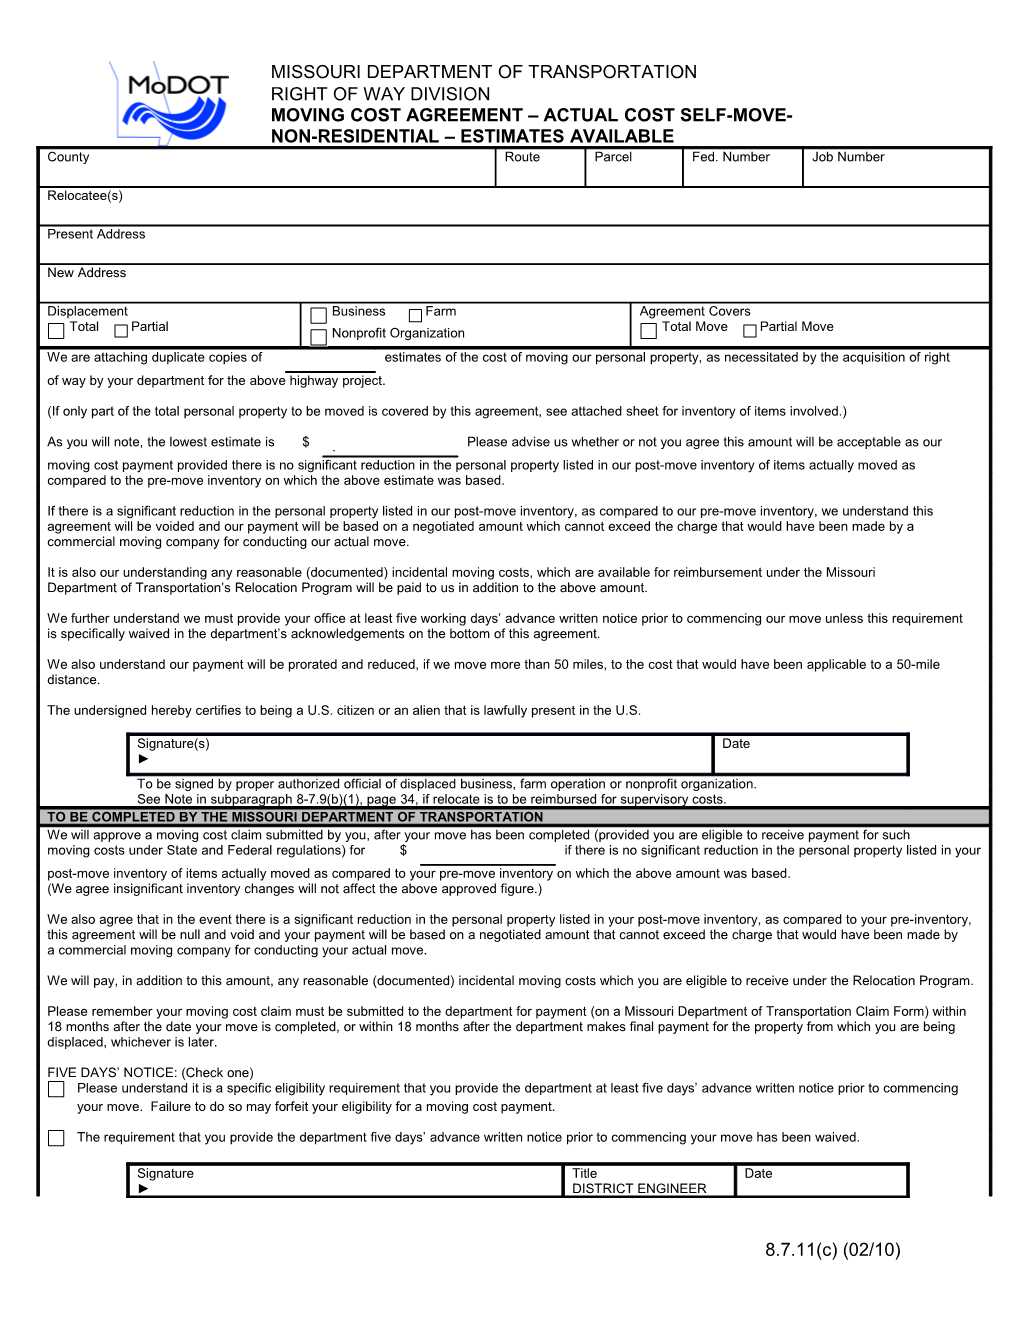 Moving Cost Agreement Actual Cost Self Move Form 236.8.7.11.C